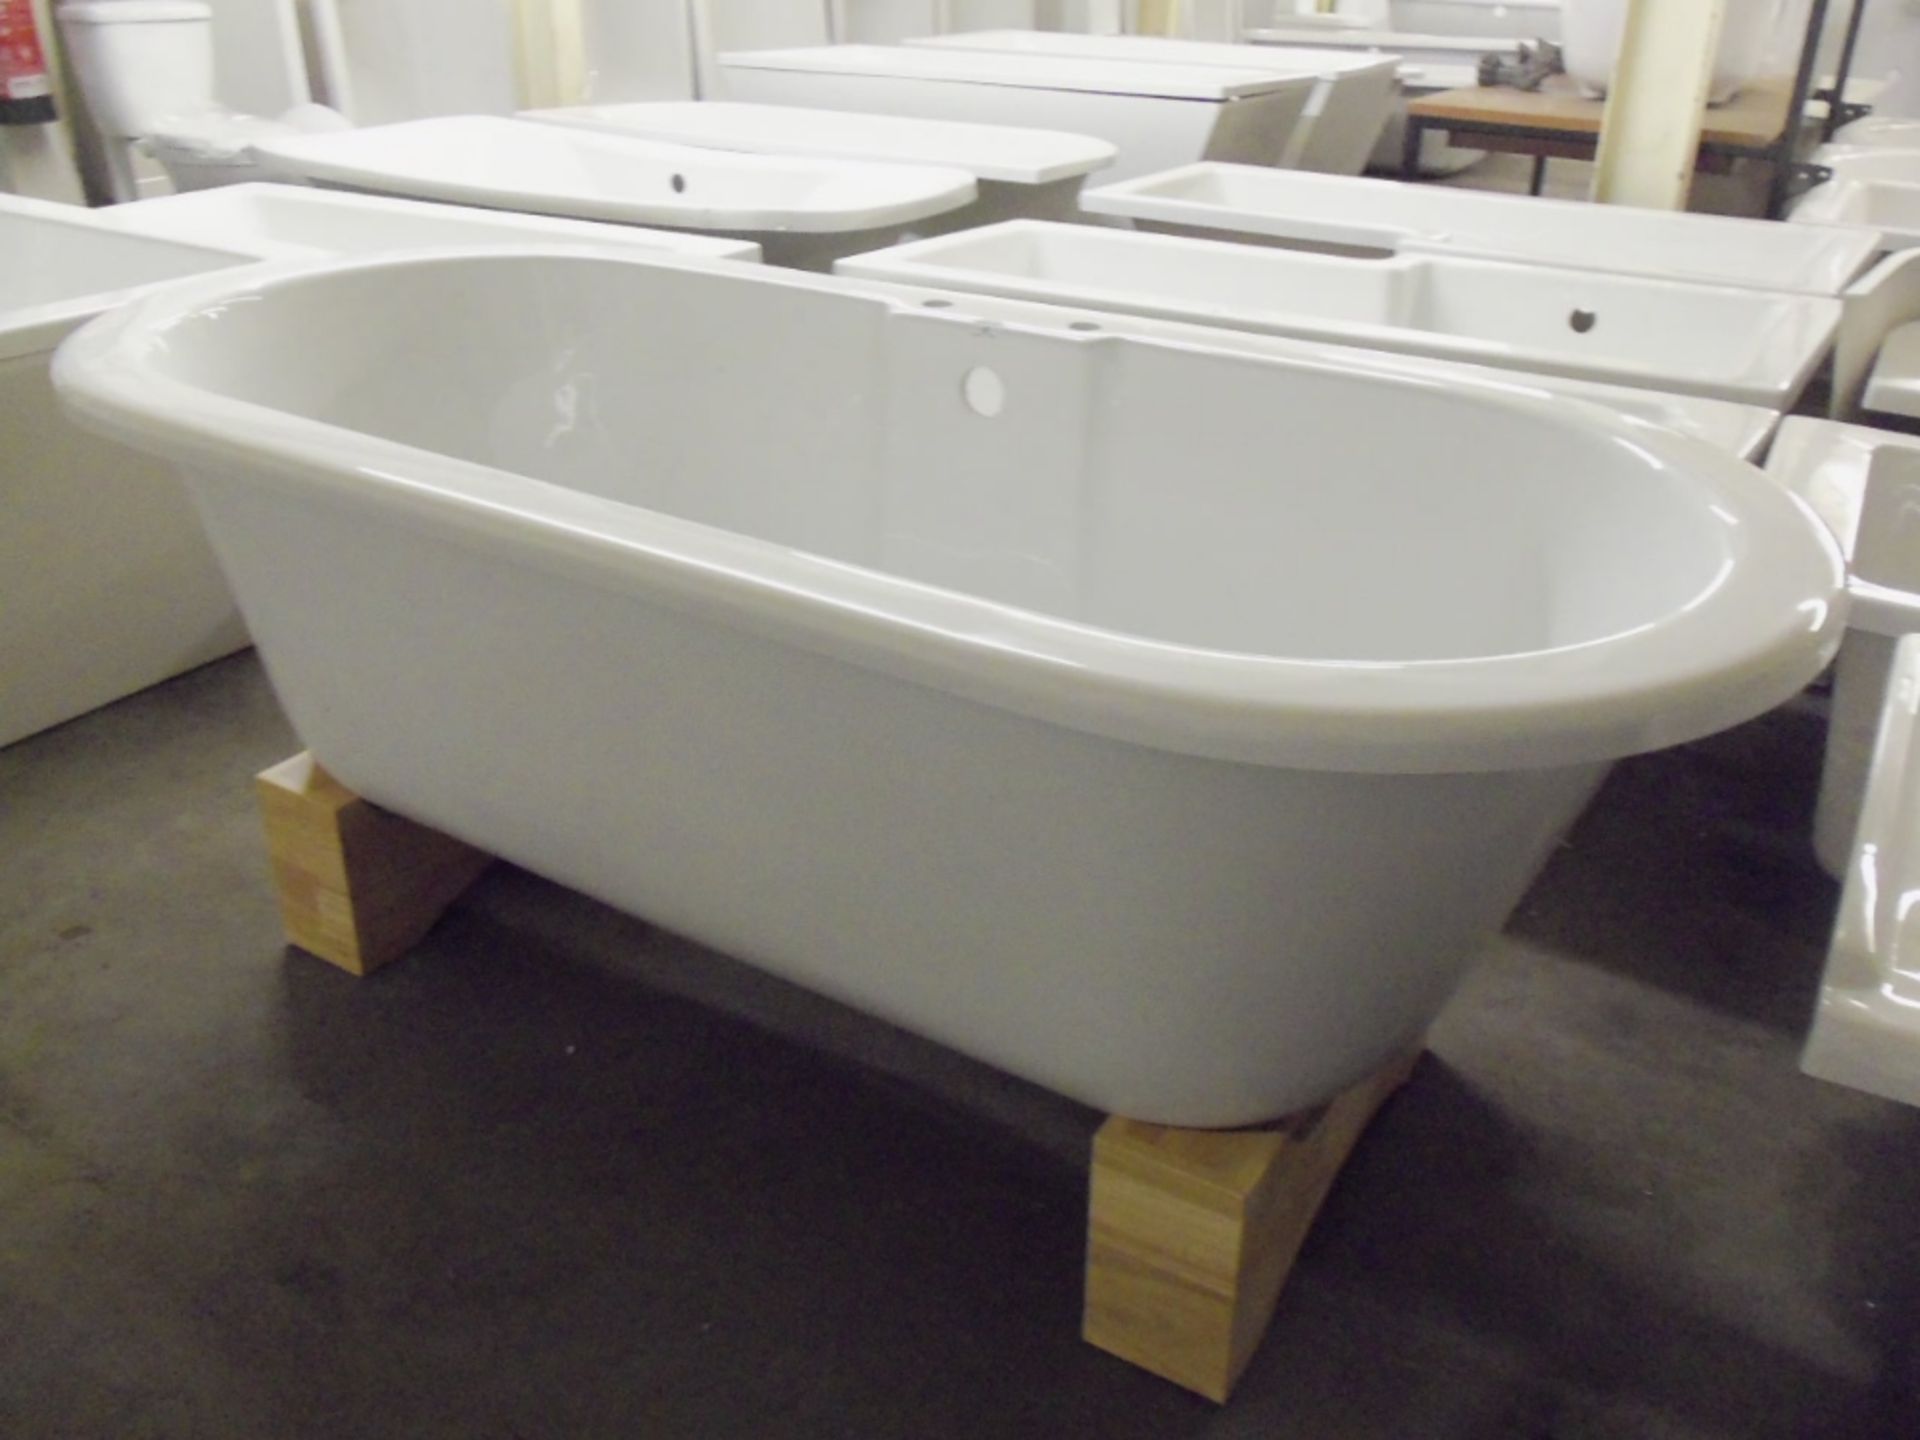 1700x800 Double ended roll top bath with wooden cradles RRP £1400